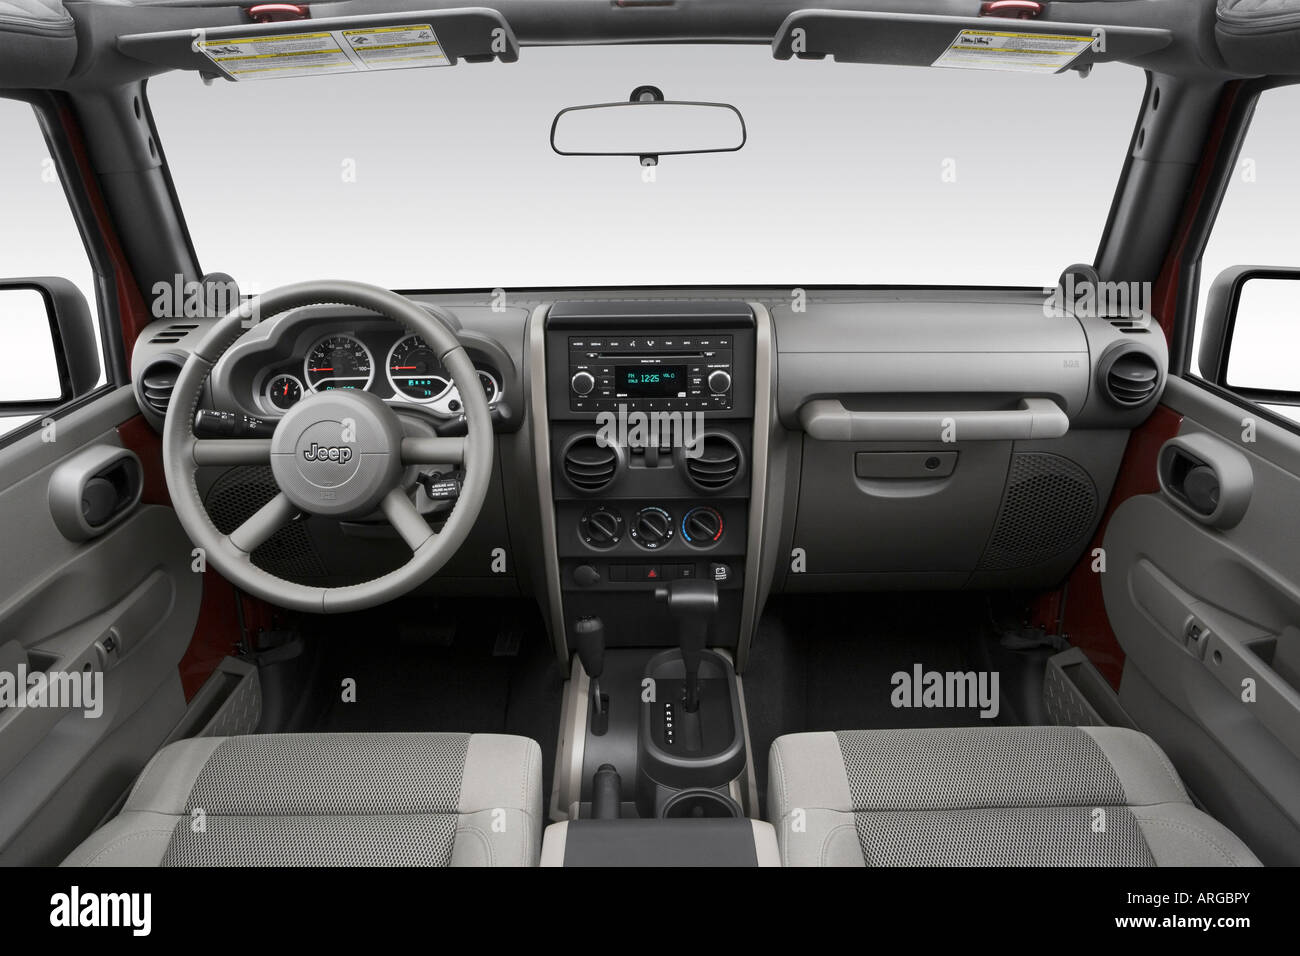 2007 Jeep Wrangler Sahara in Red - Dashboard, center console, gear shifter  view Stock Photo - Alamy